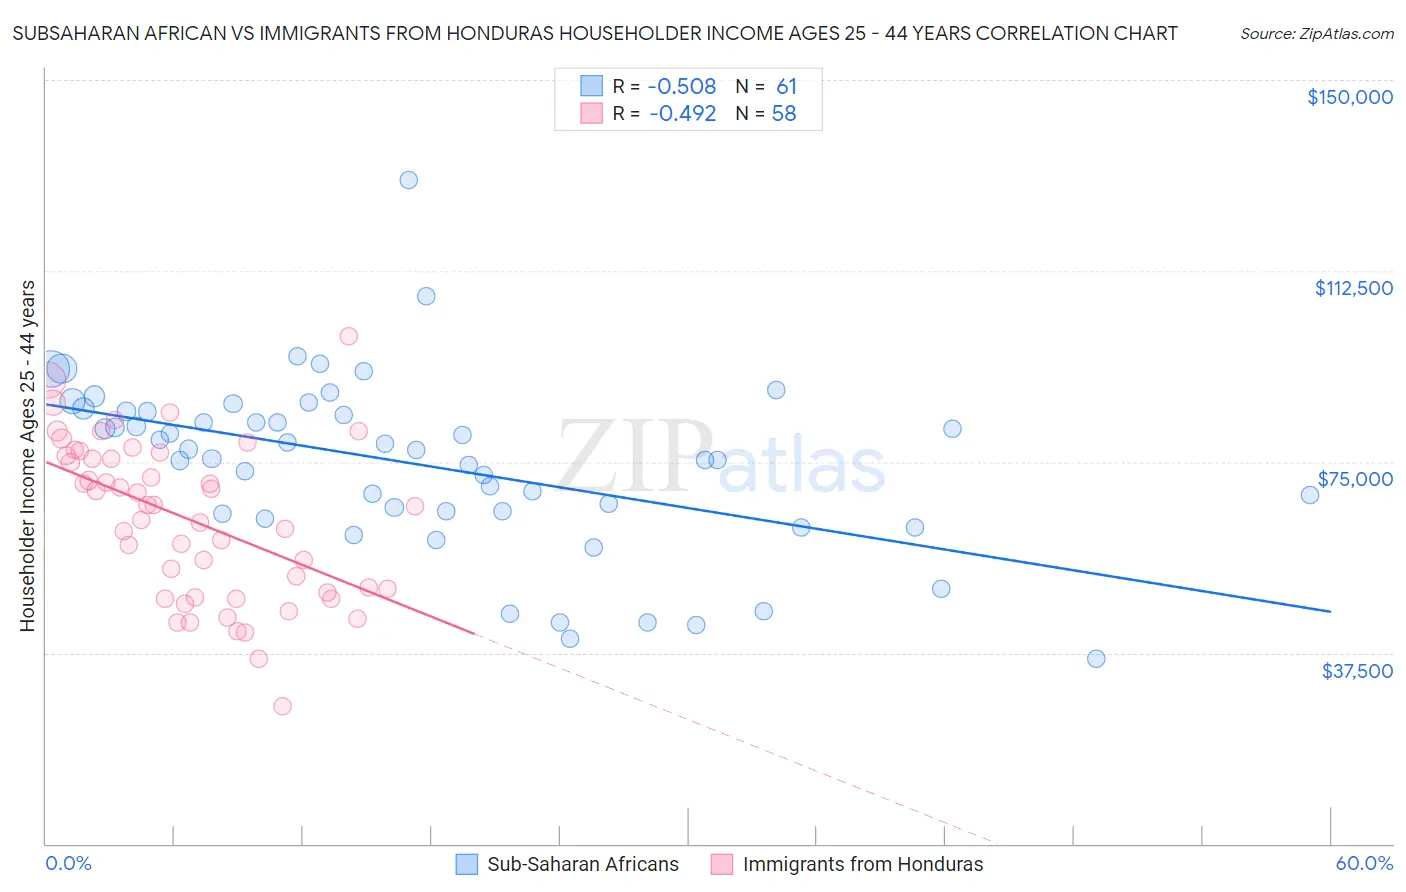 Subsaharan African vs Immigrants from Honduras Householder Income Ages 25 - 44 years